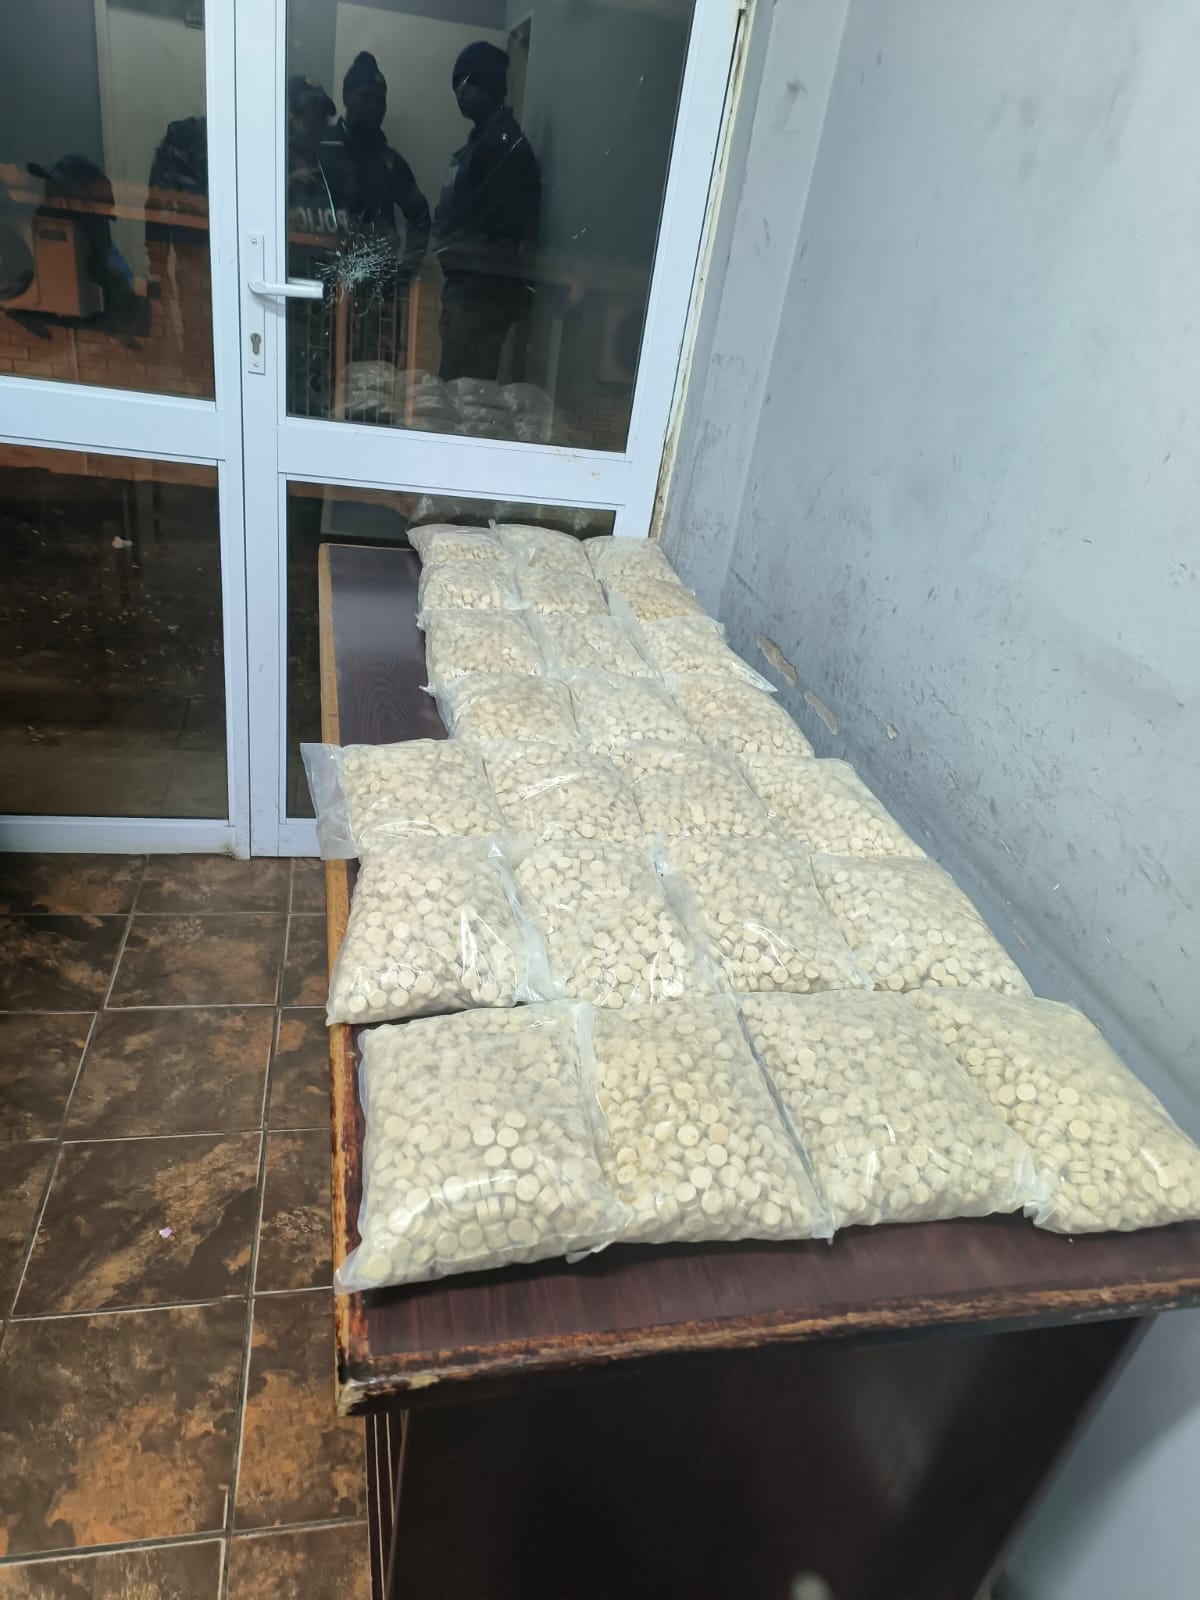 Mandrax worth R2 million found in laundry basket in East London